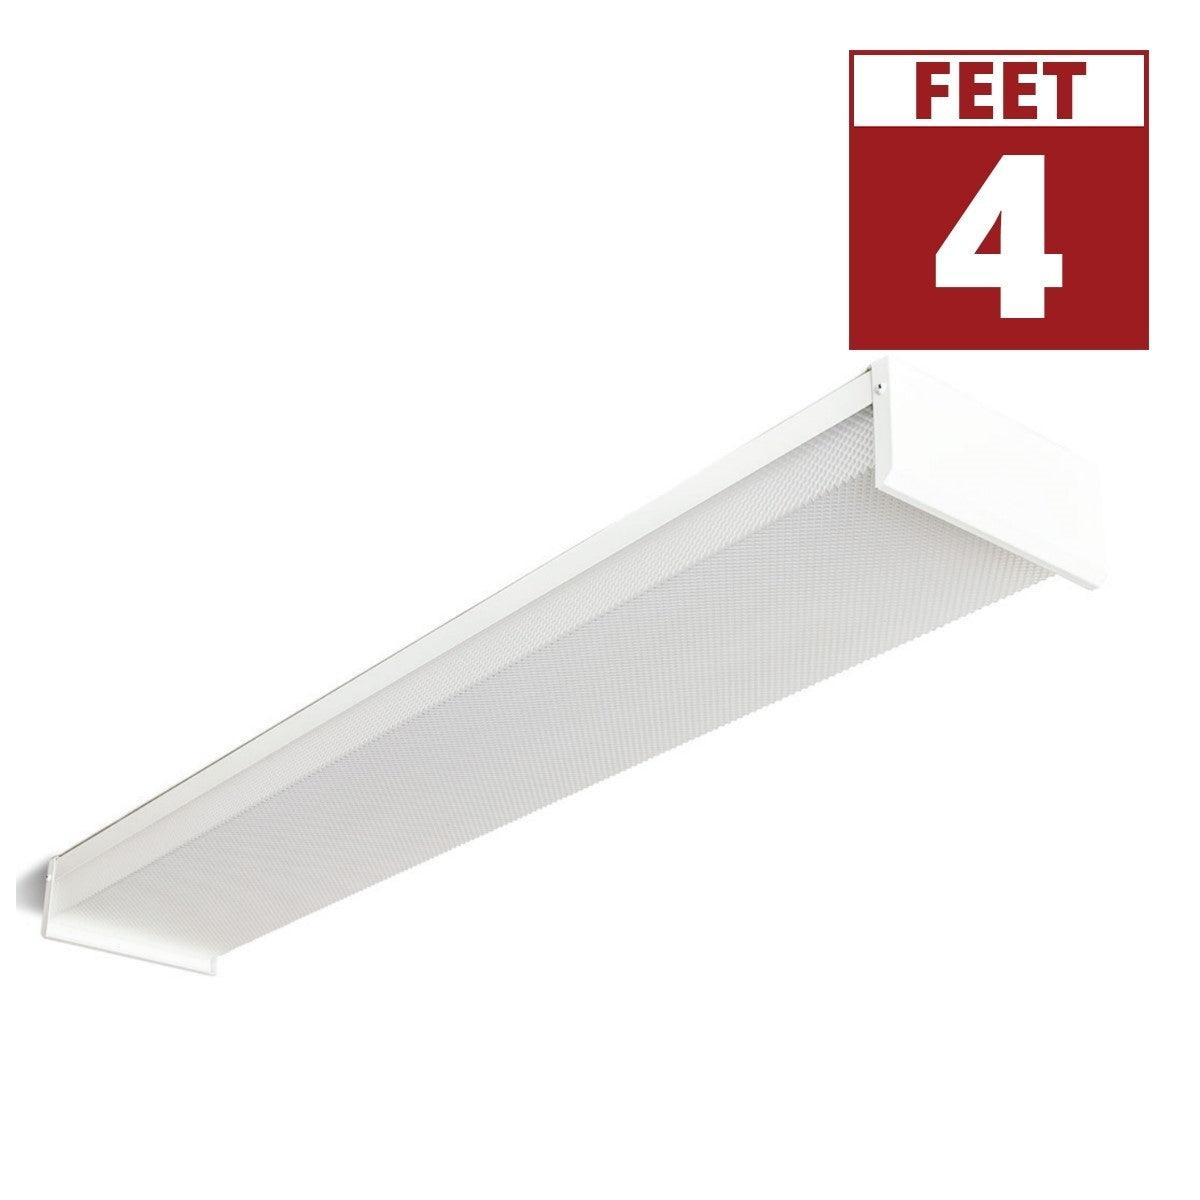 4ft LED Ready Wrap Fixture 4-lamp Single End Wiring LED T8 Bulbs Not Included - Bees Lighting